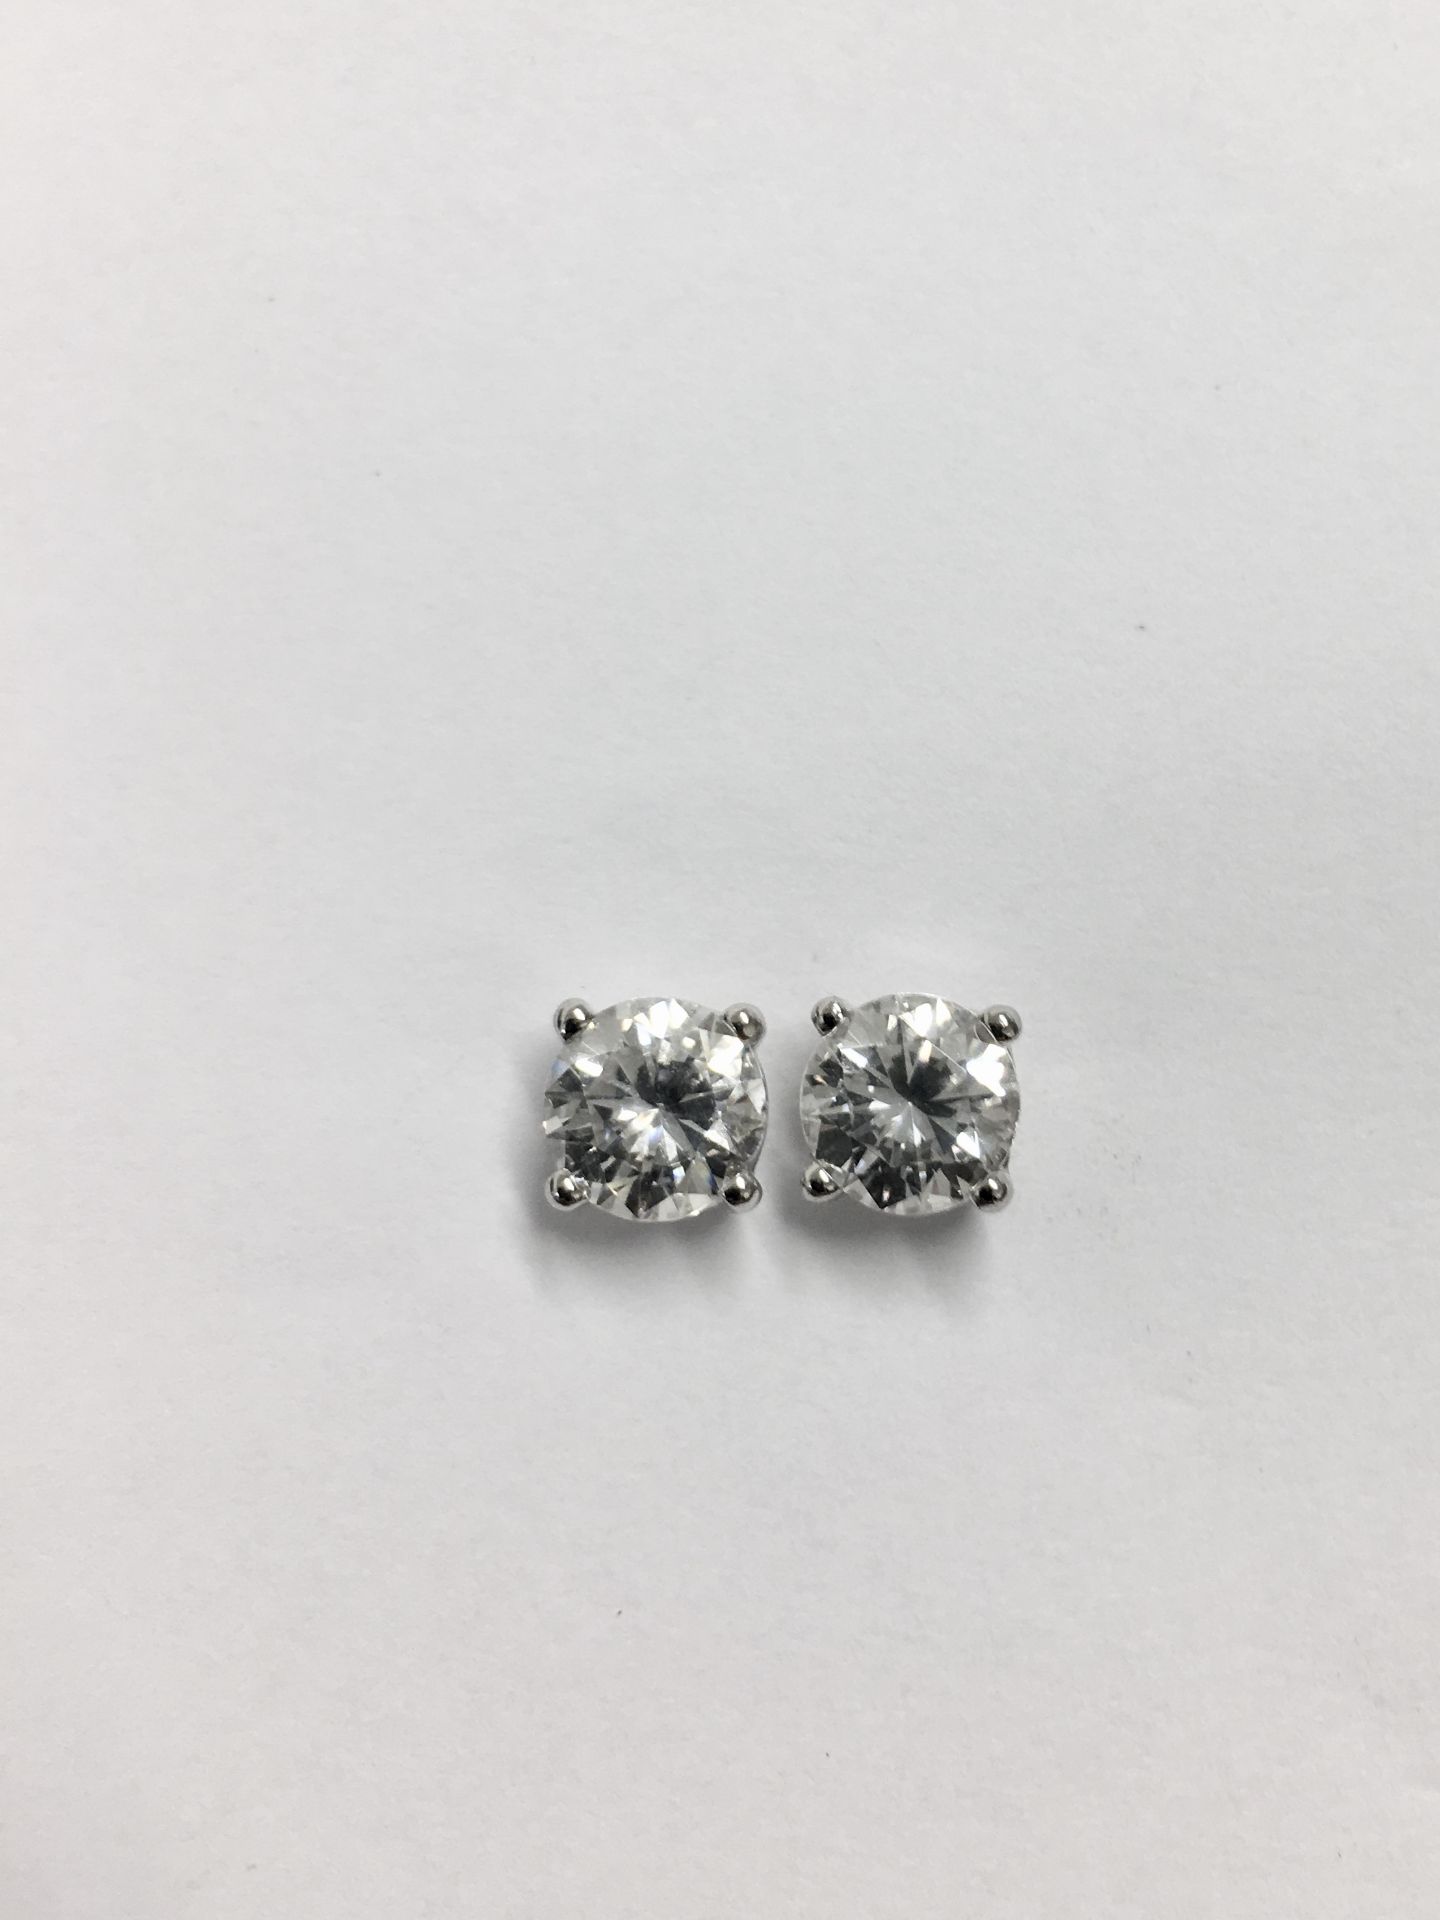 1.20Ct Diamond Solitaire Earrings Set In 18Ct White Gold. - Image 9 of 12